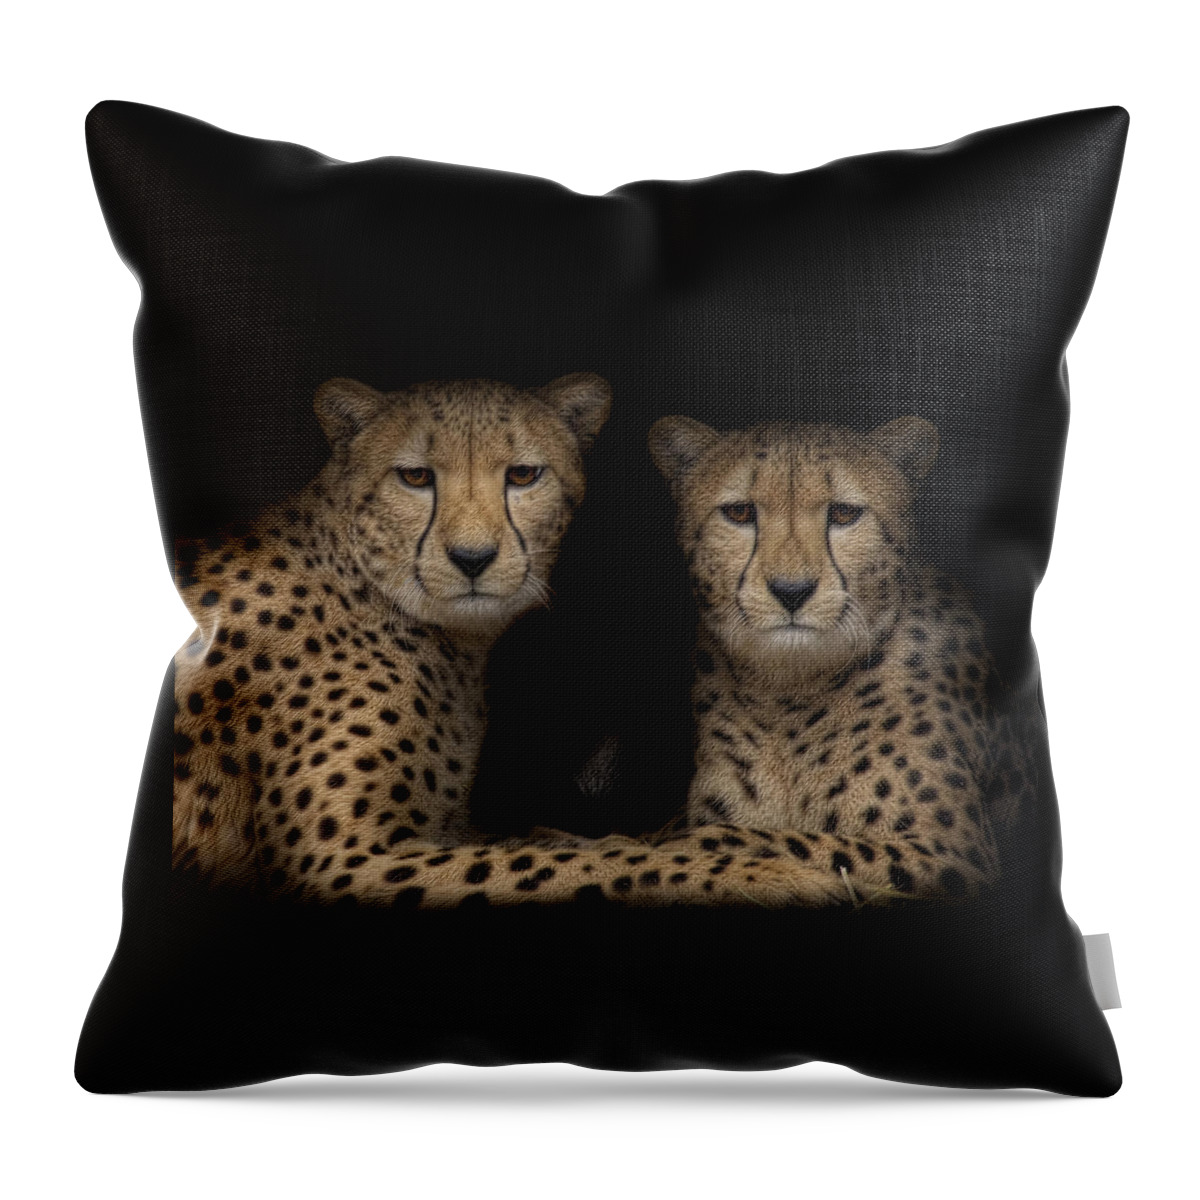  Throw Pillow featuring the photograph Brothers by Cheri McEachin